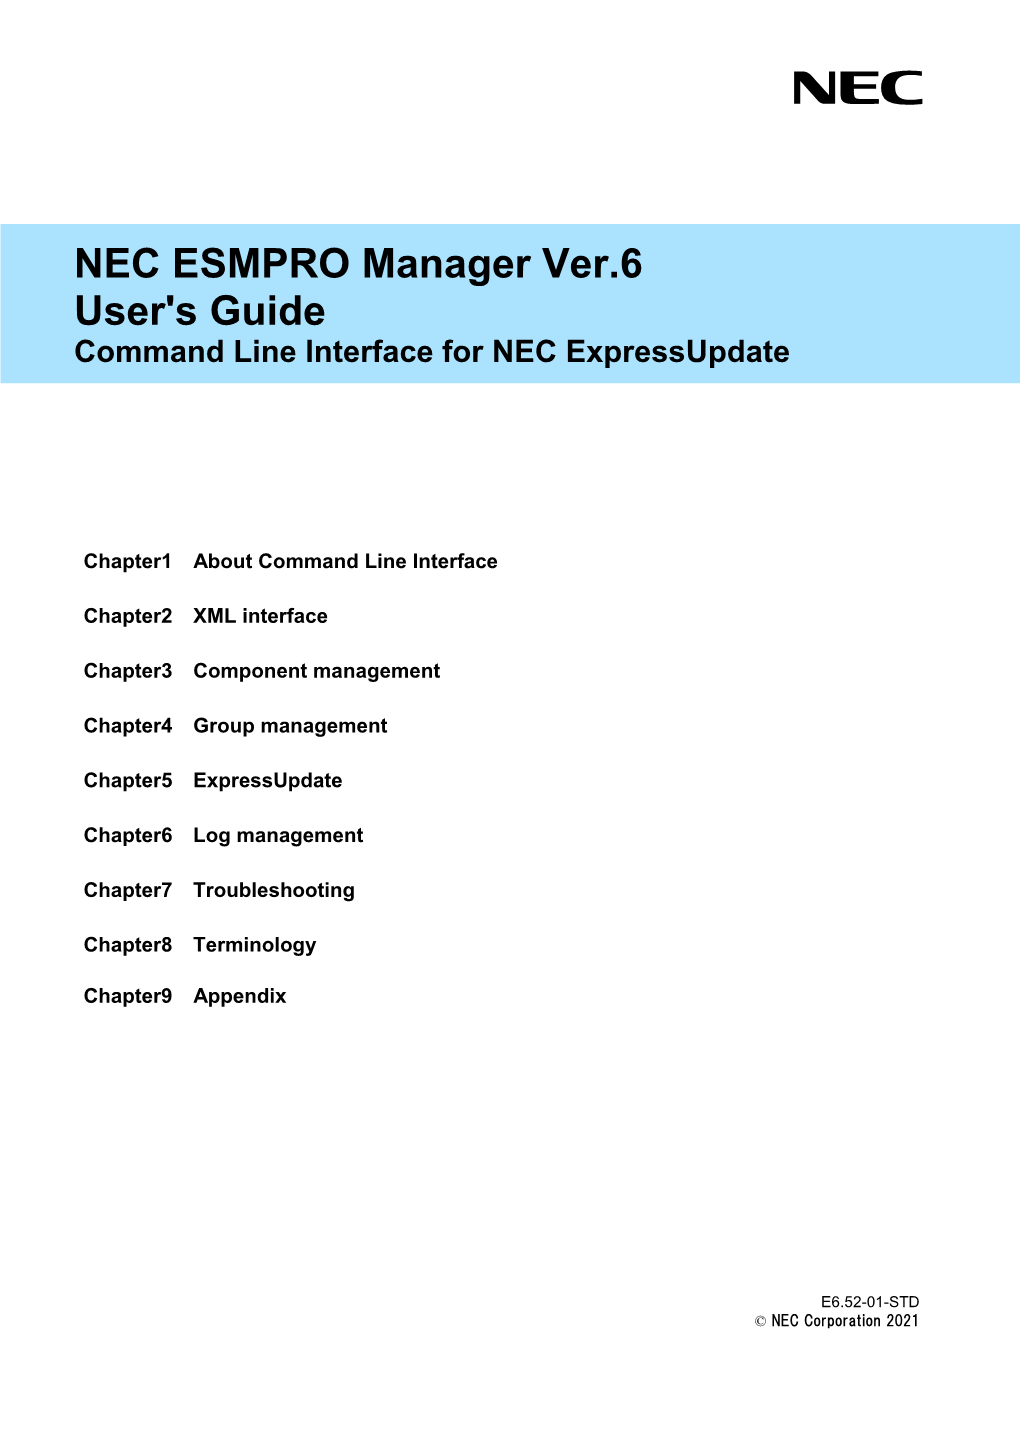 NEC ESMPRO Manager Ver.6 User's Guide Command Line Interface for NEC Expressupdate